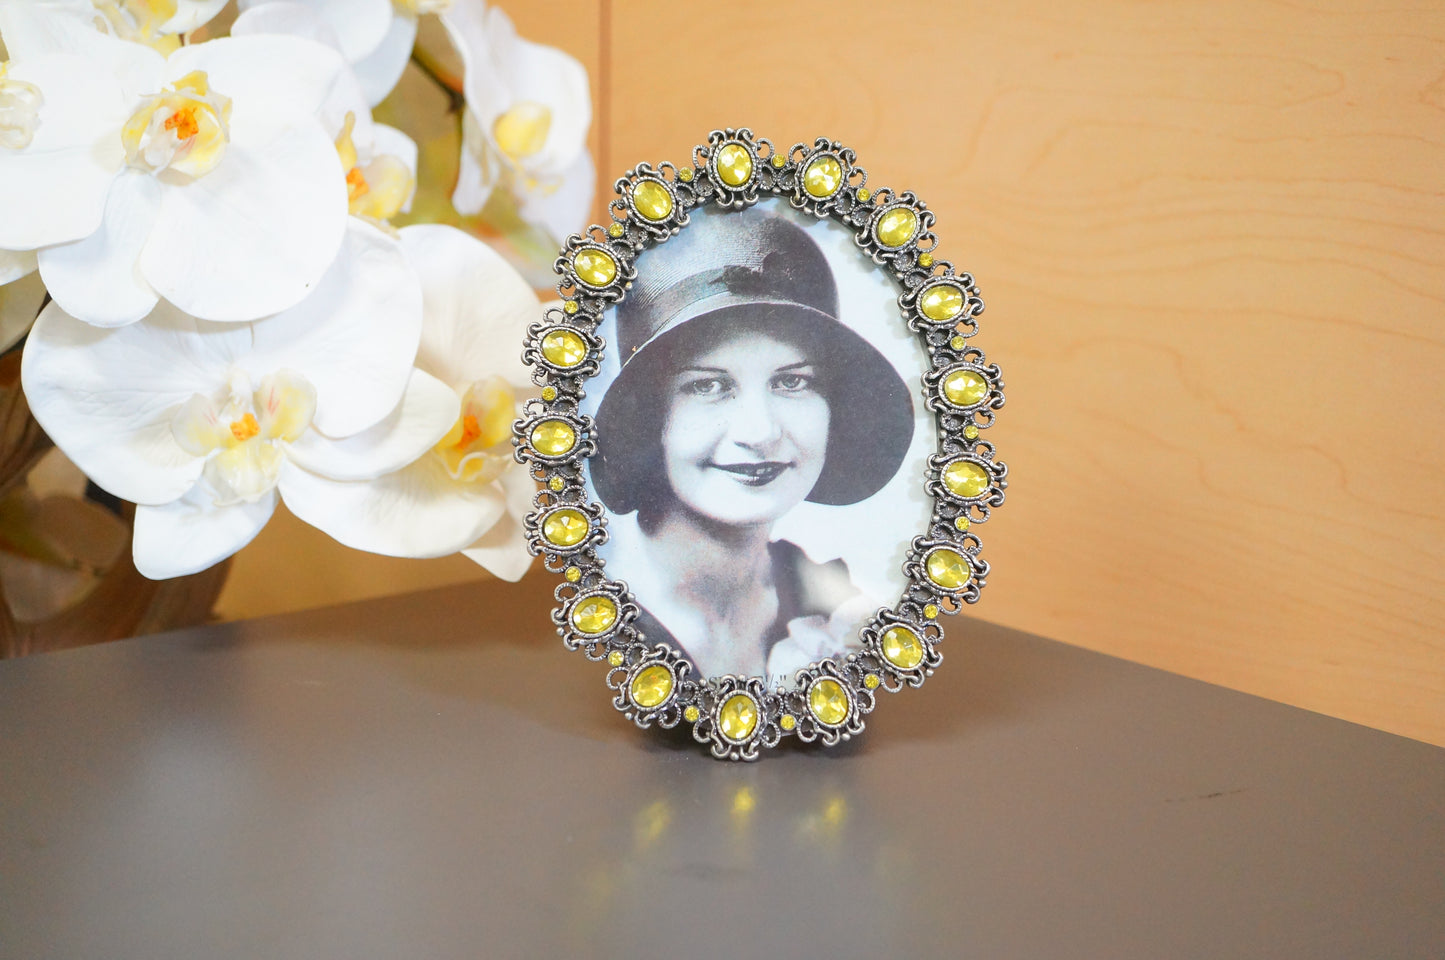 Vintage Ornate Yellow Faux Crystal Oval Free Standing Desk Photo Frame 3.5"x5"